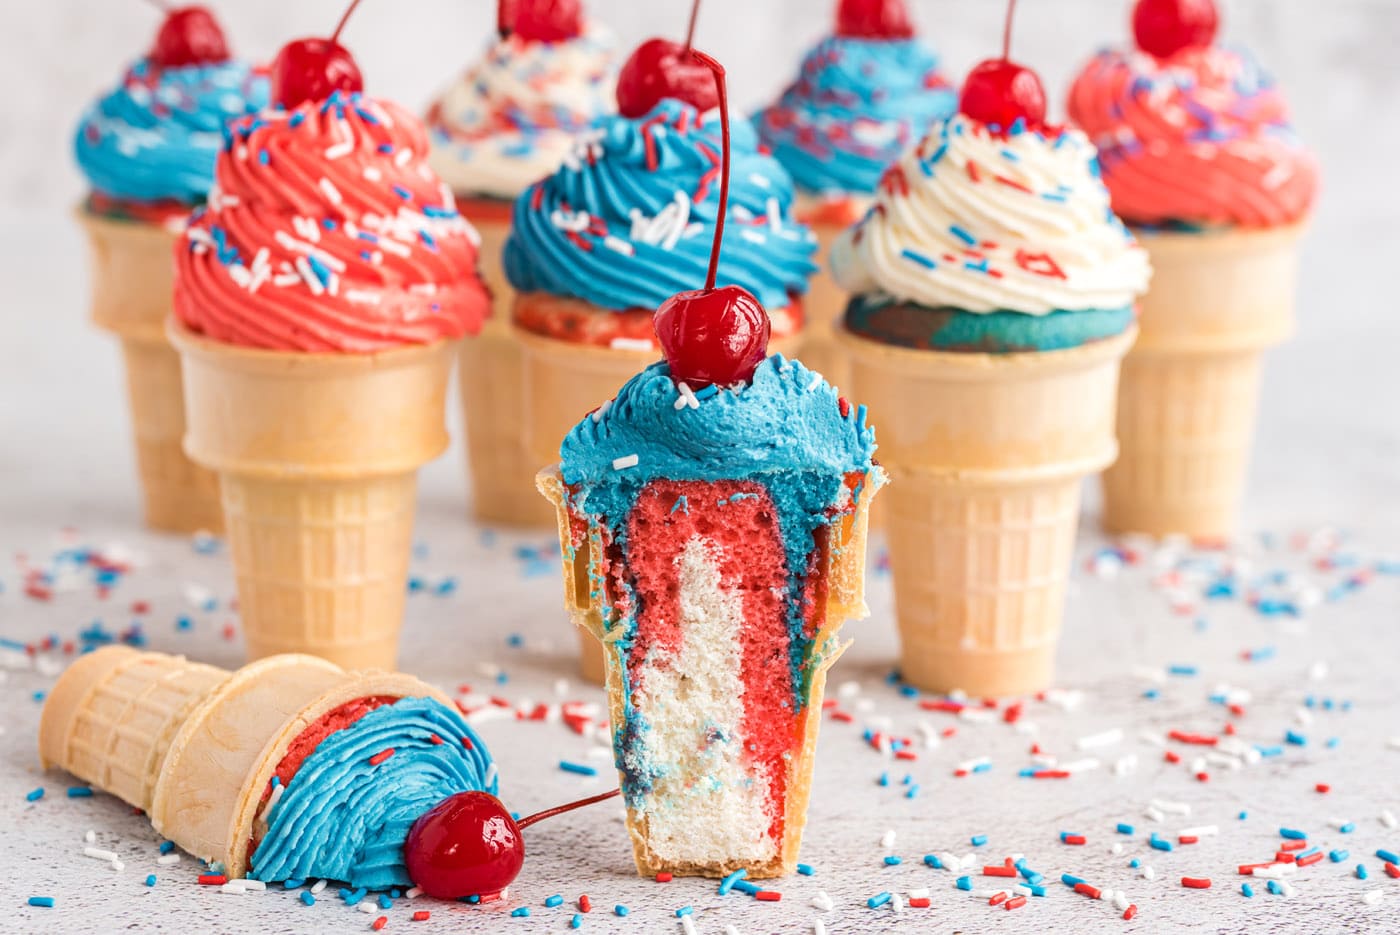 Pillowy buttercream frosting is piped on top of colorful red, white, and blue cake in a cone to mimi